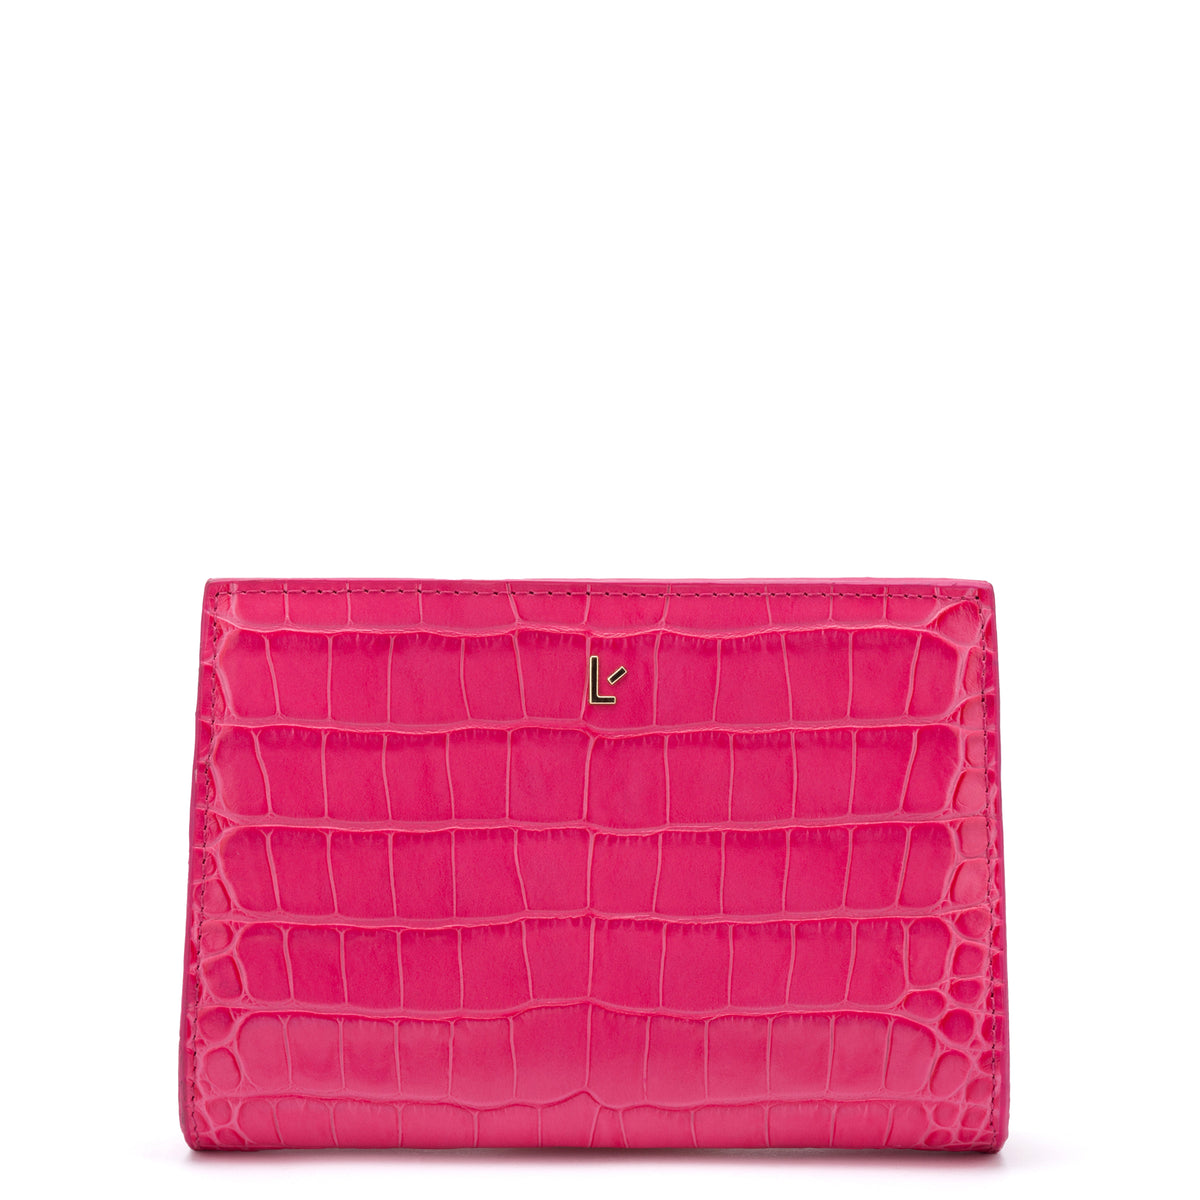 Erin Clutch In Bright Pink Stamped Leather